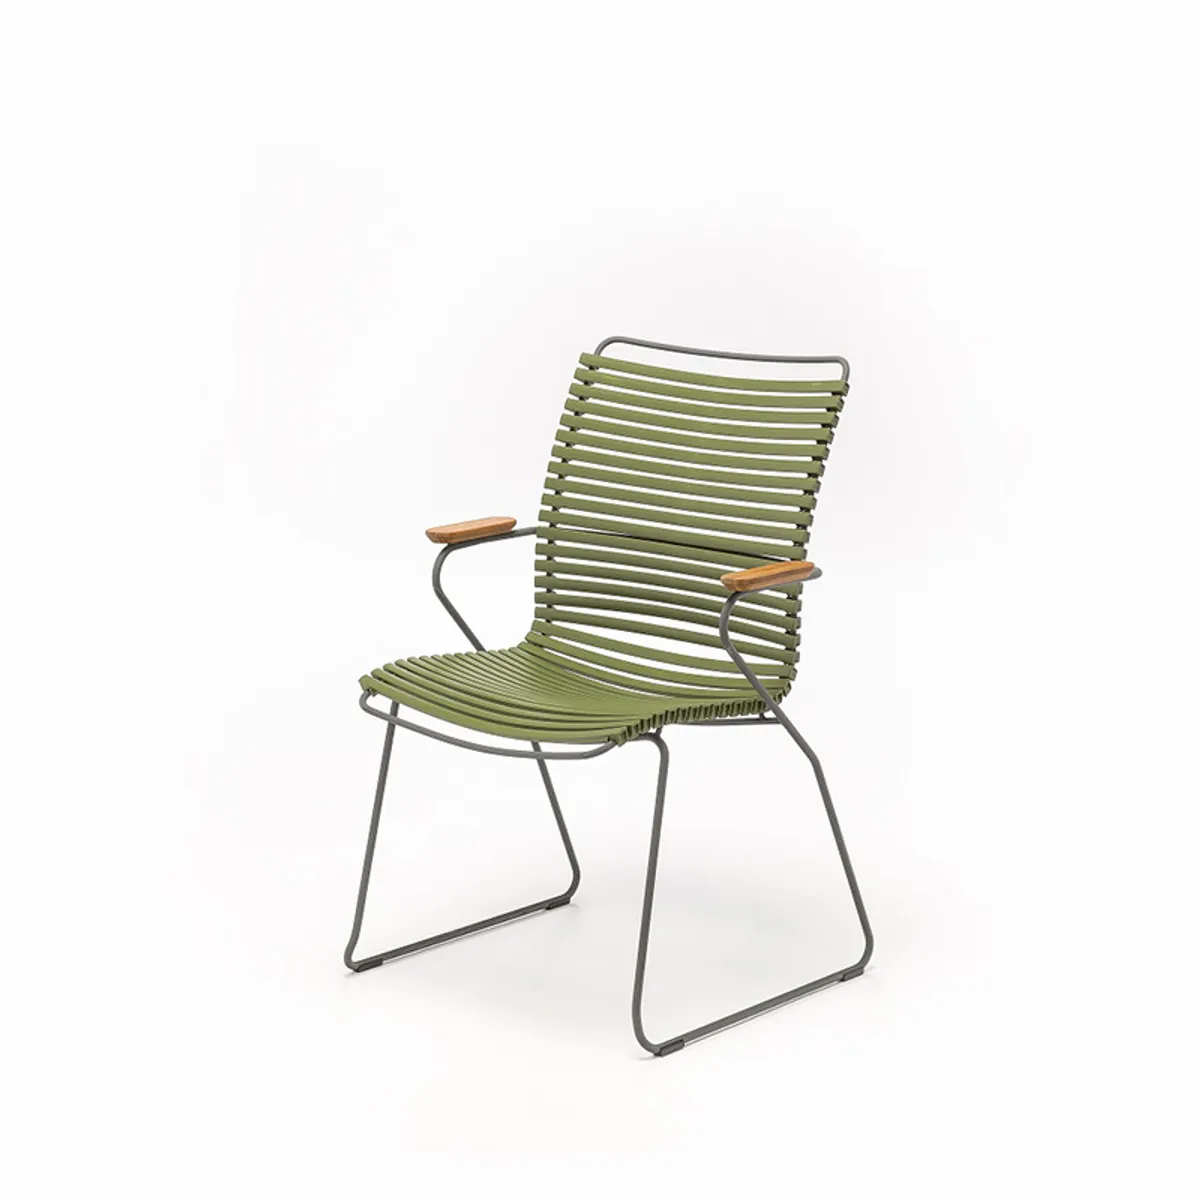 Crackle High Back Armchair Outdoor Furniture 071